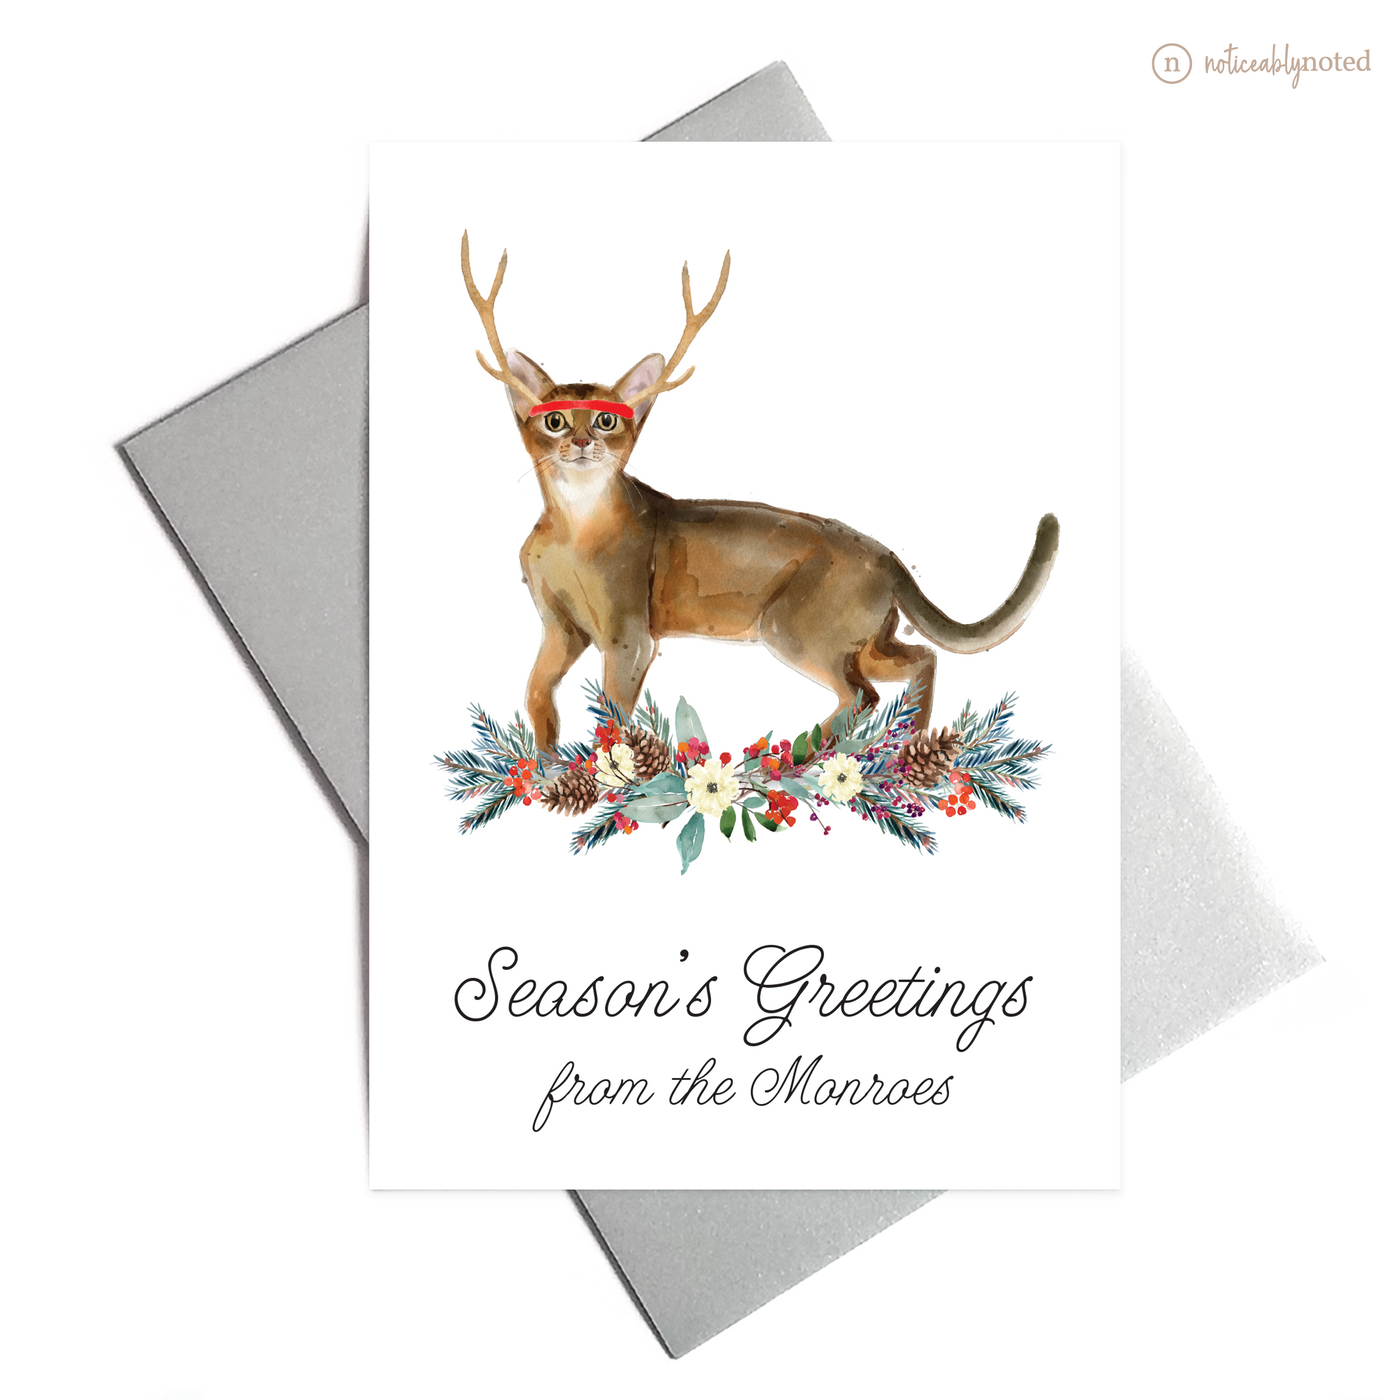 Abyssinian Christmas Cards | Noticeably Noted